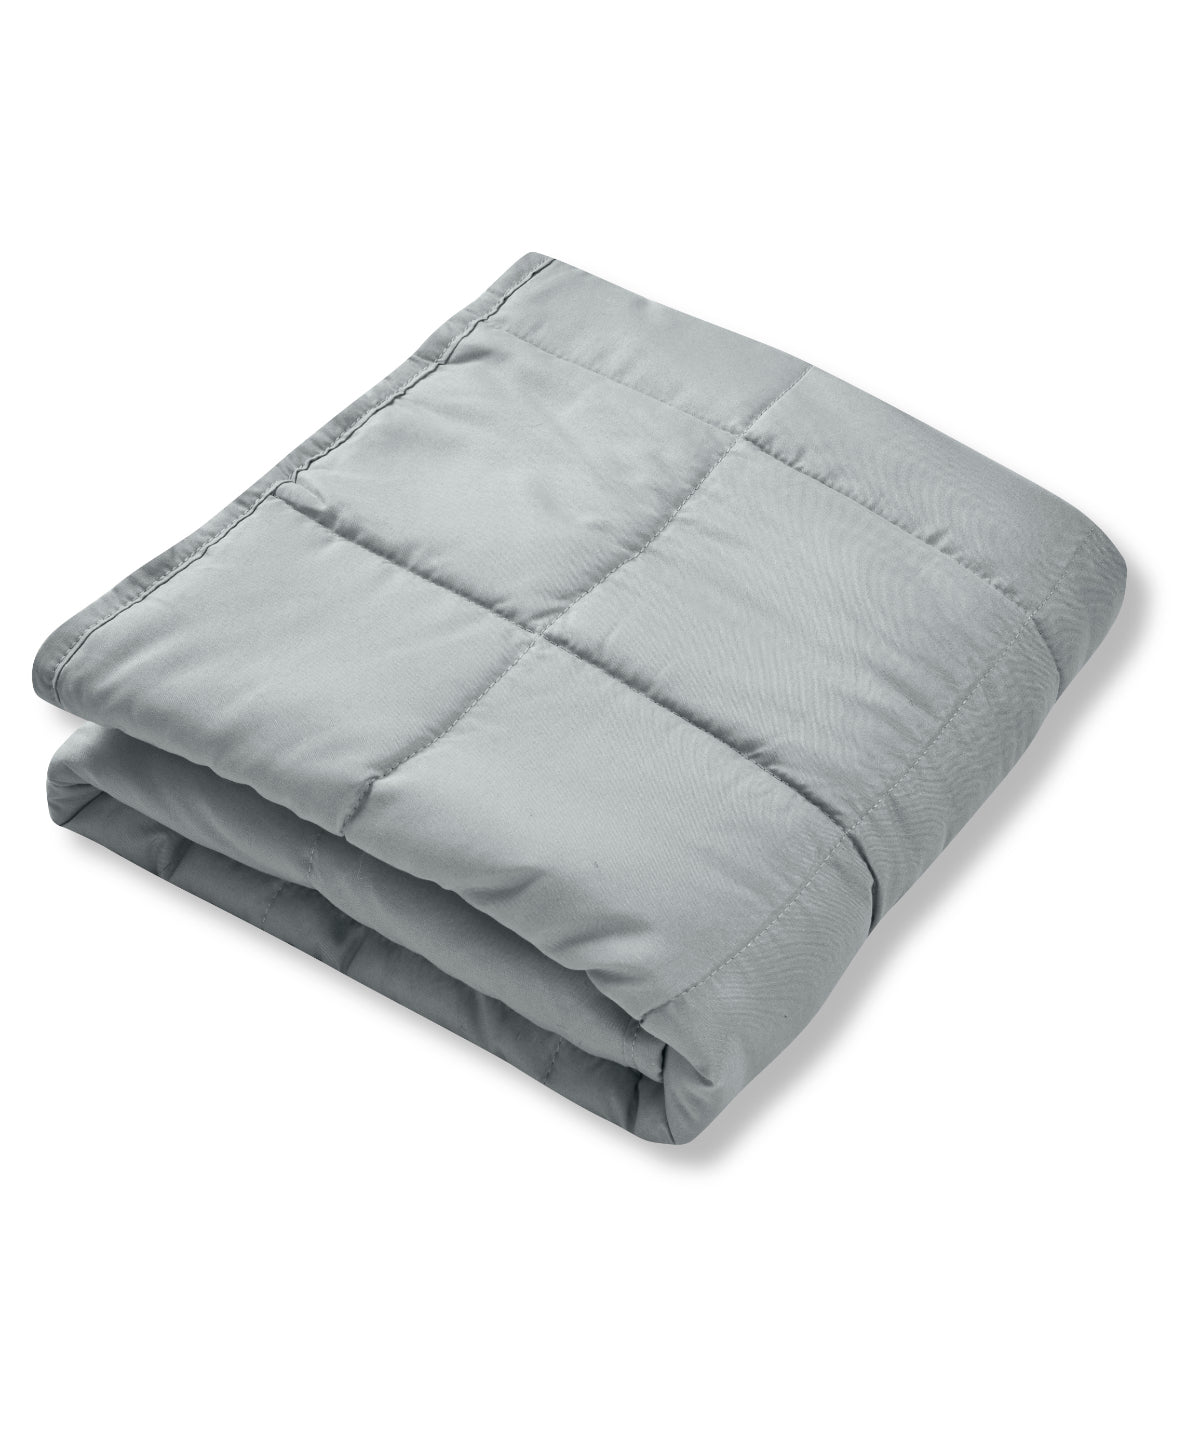 Personalised Blankets - Mid Grey Home & Living Kids weighted blanket